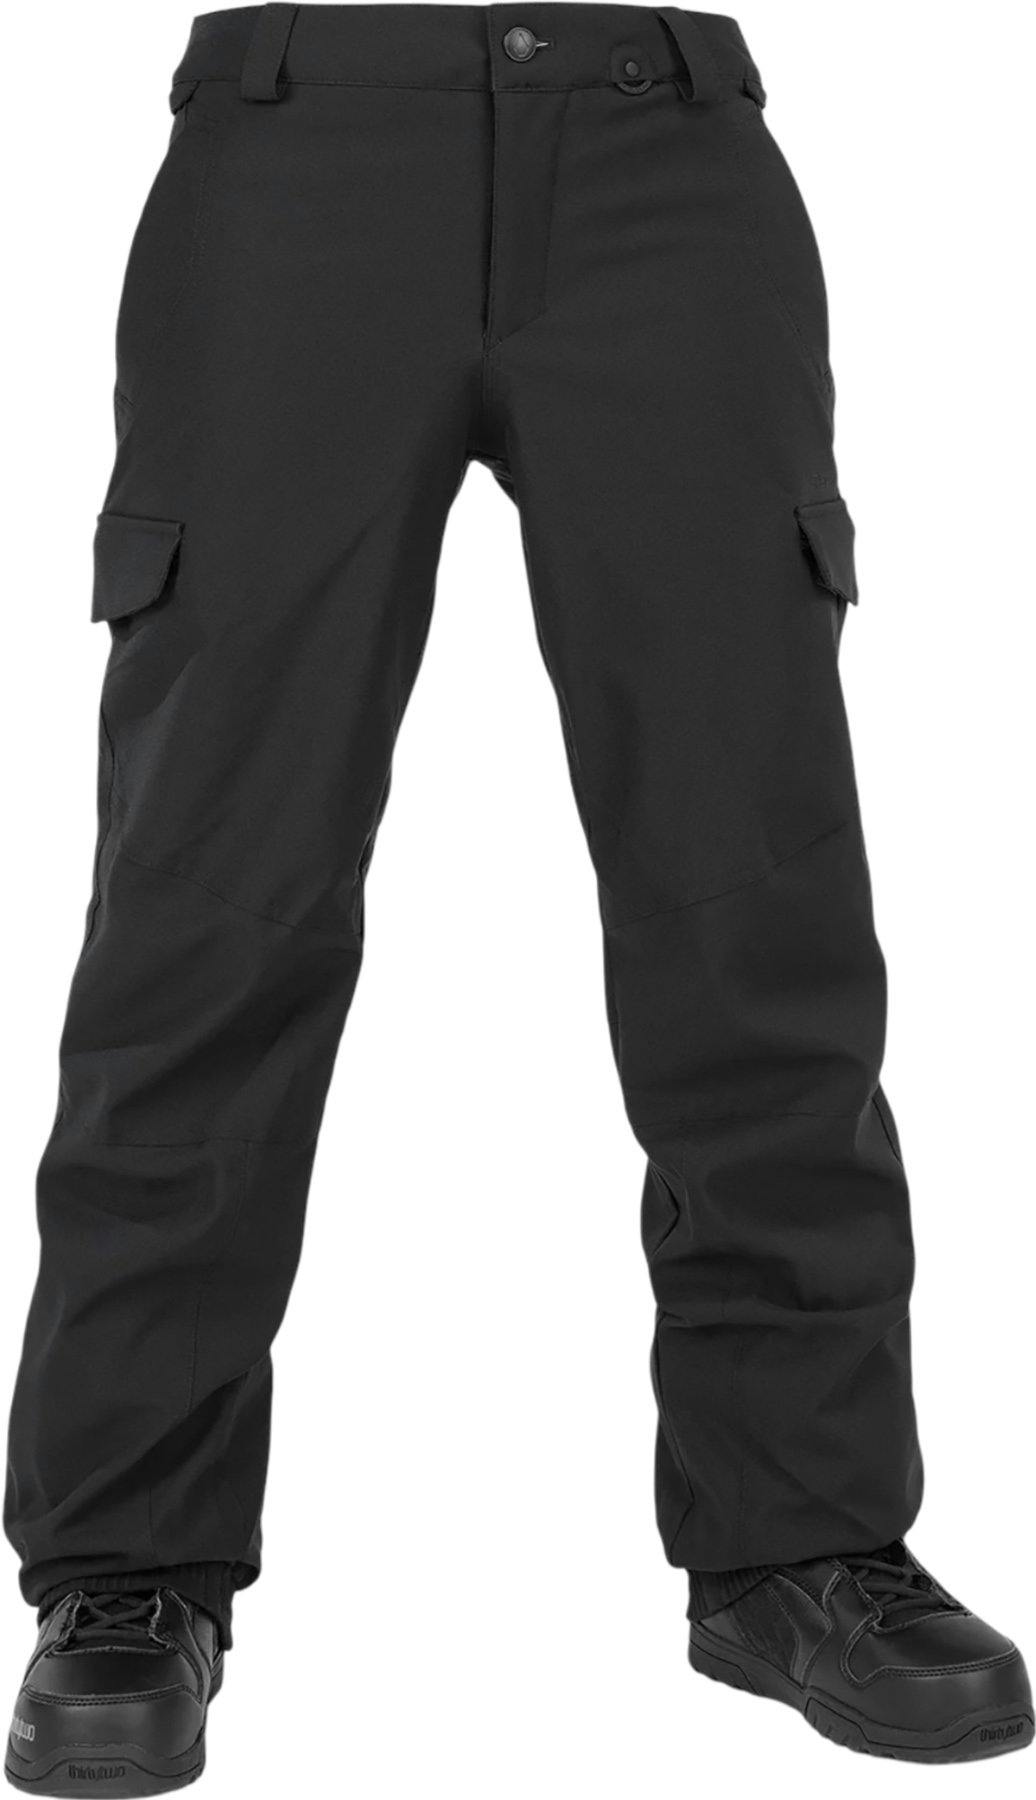 Product image for Wildling Trousers - Women's